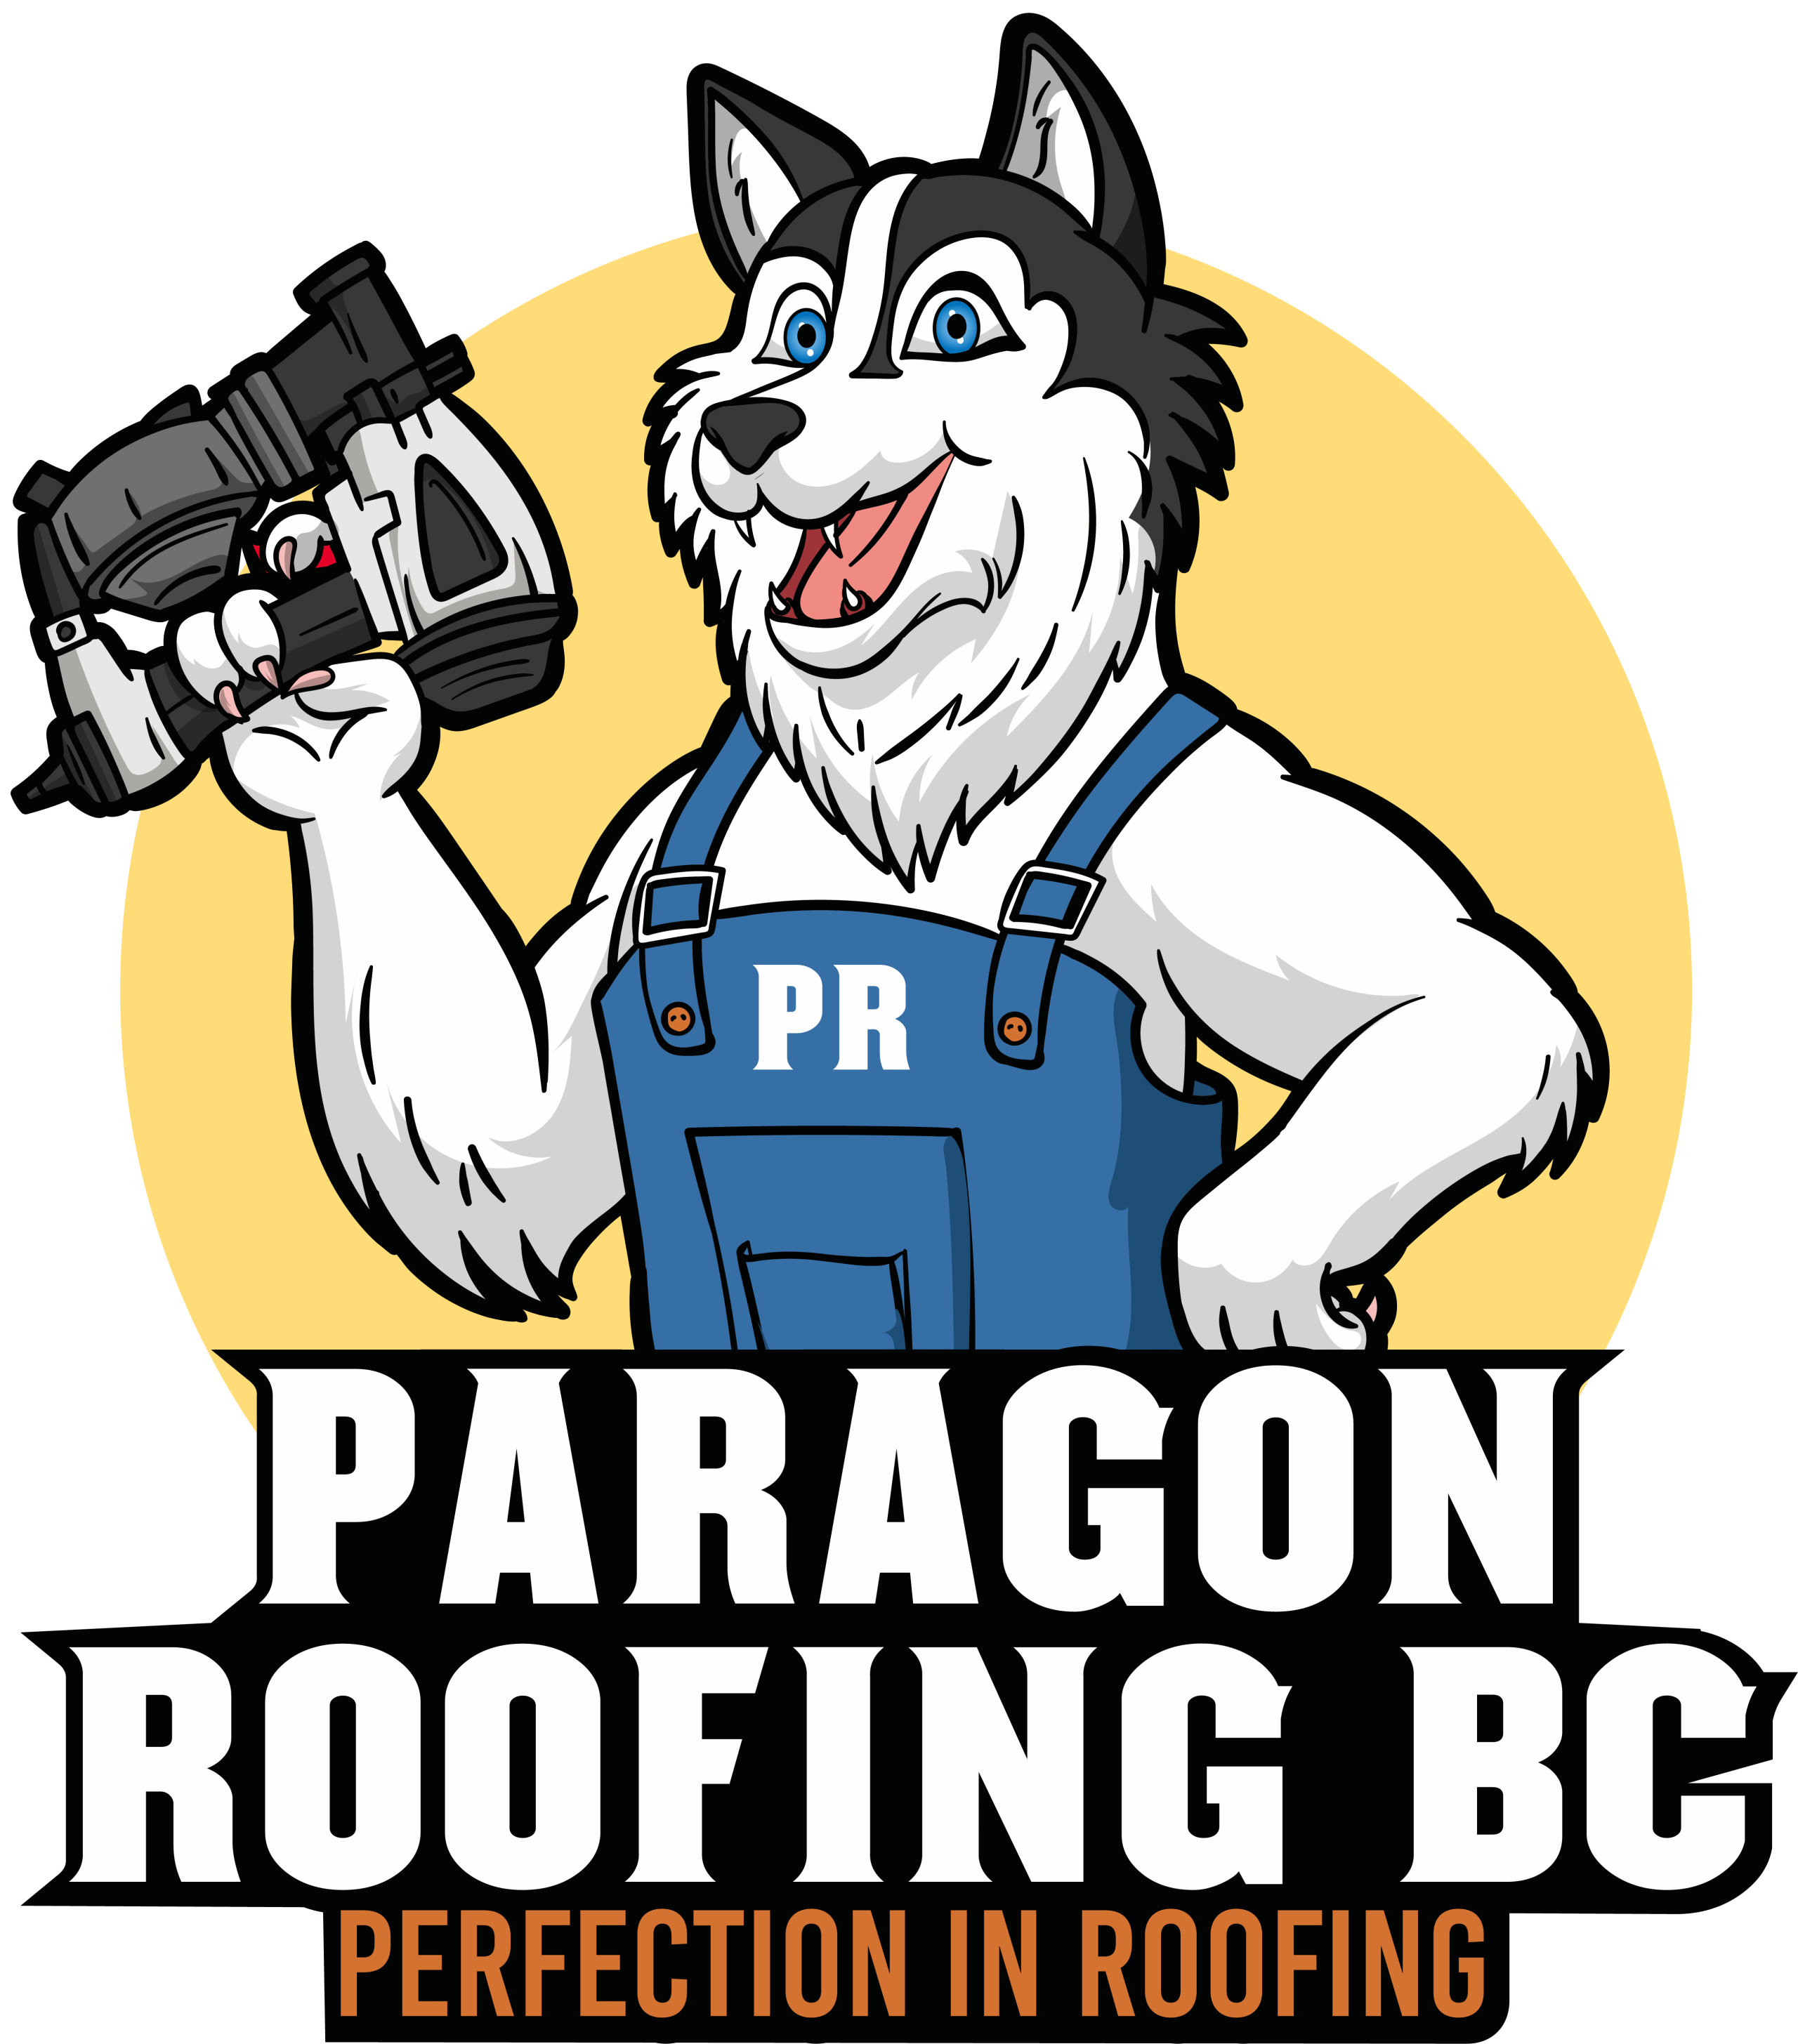 Looking for the best roofing contractor near you? Look no further than Paragon Roofing BC. As one of the top roofers in Vancouver, we specialize in providing high-quality roofing services to homeowners and